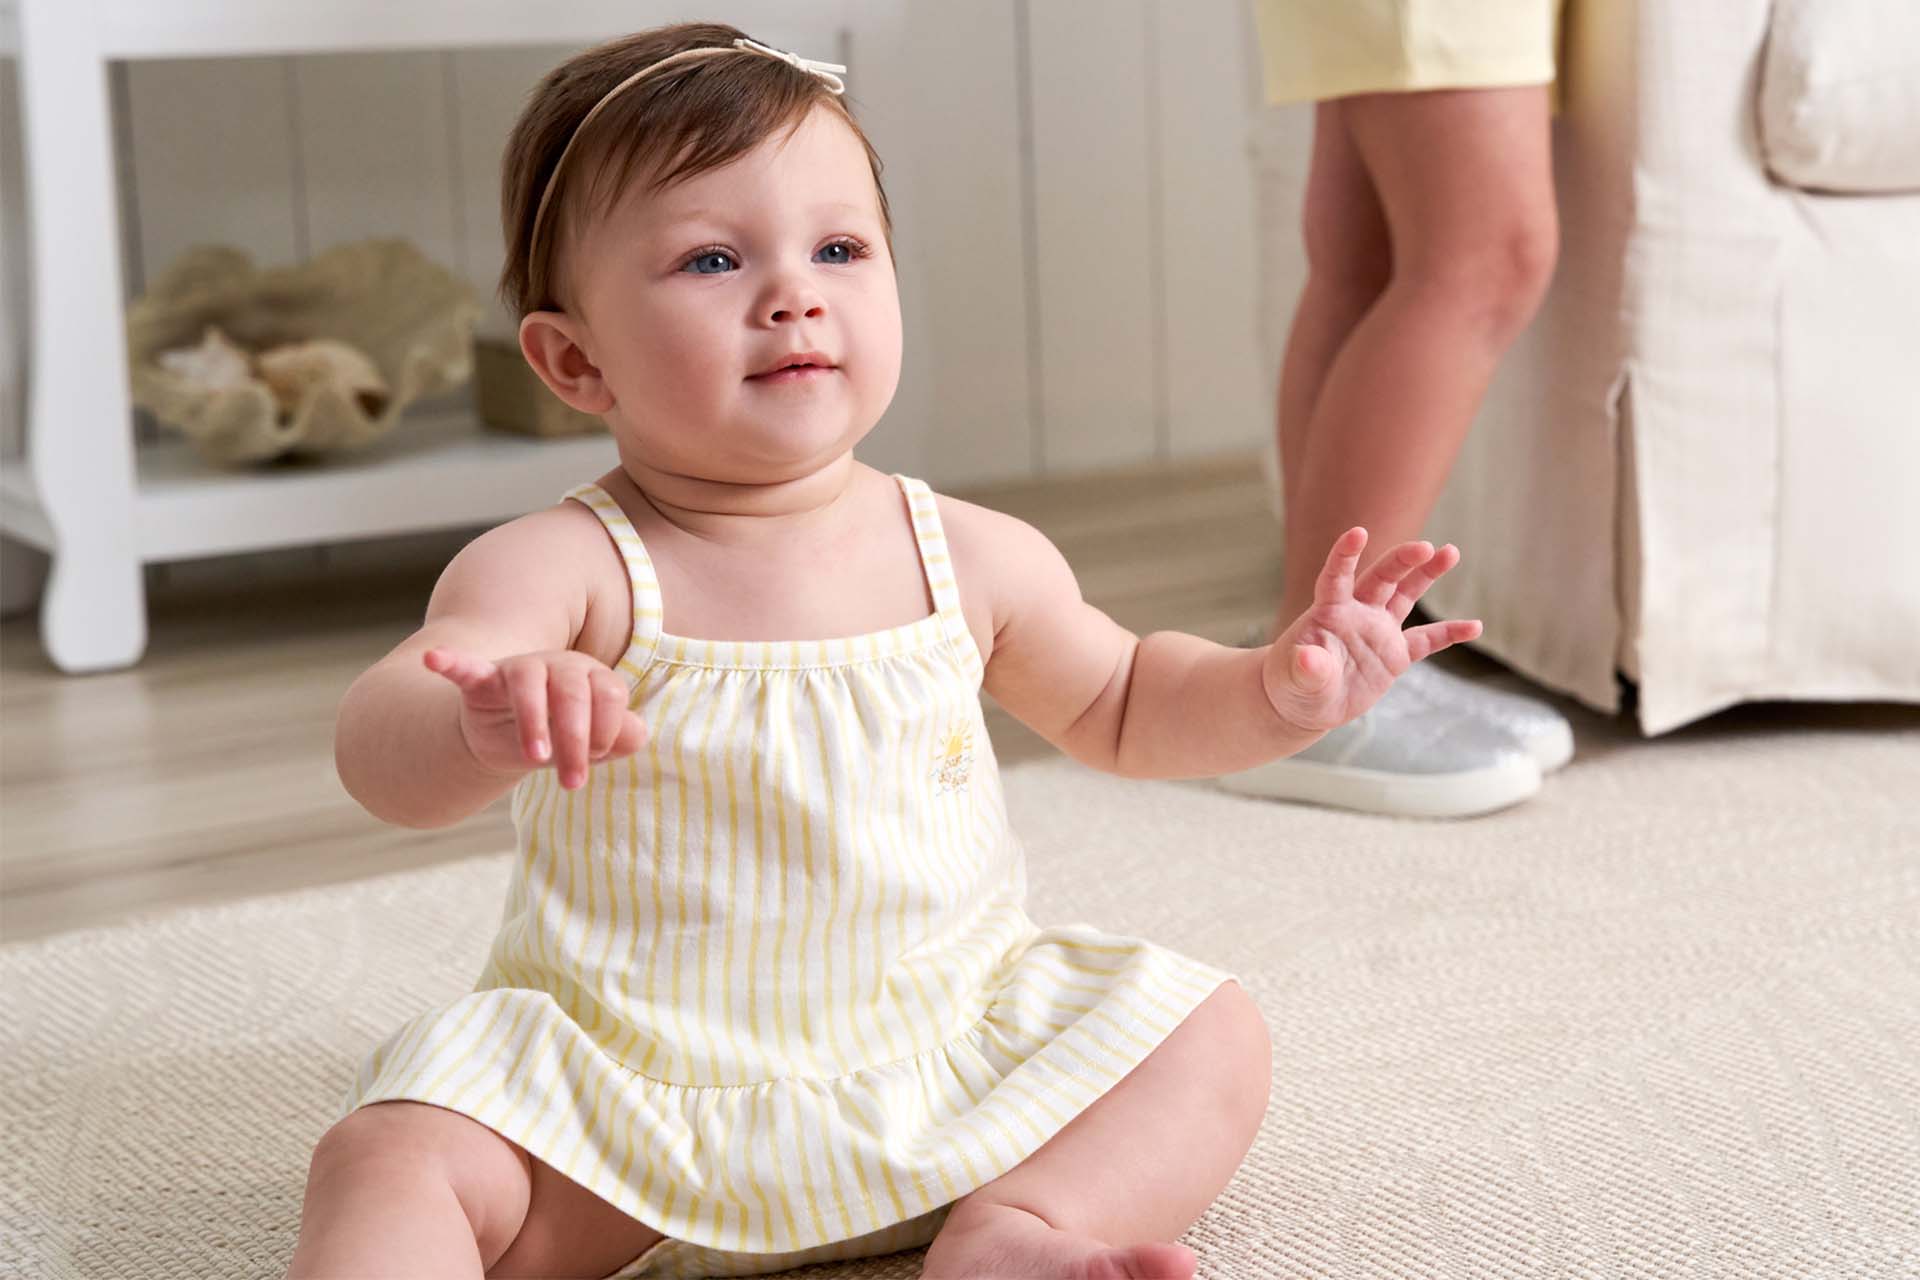 A baby in a yellow striped dress sits on the floor, looking up with arms outstretched, with a sibling standing nearby.